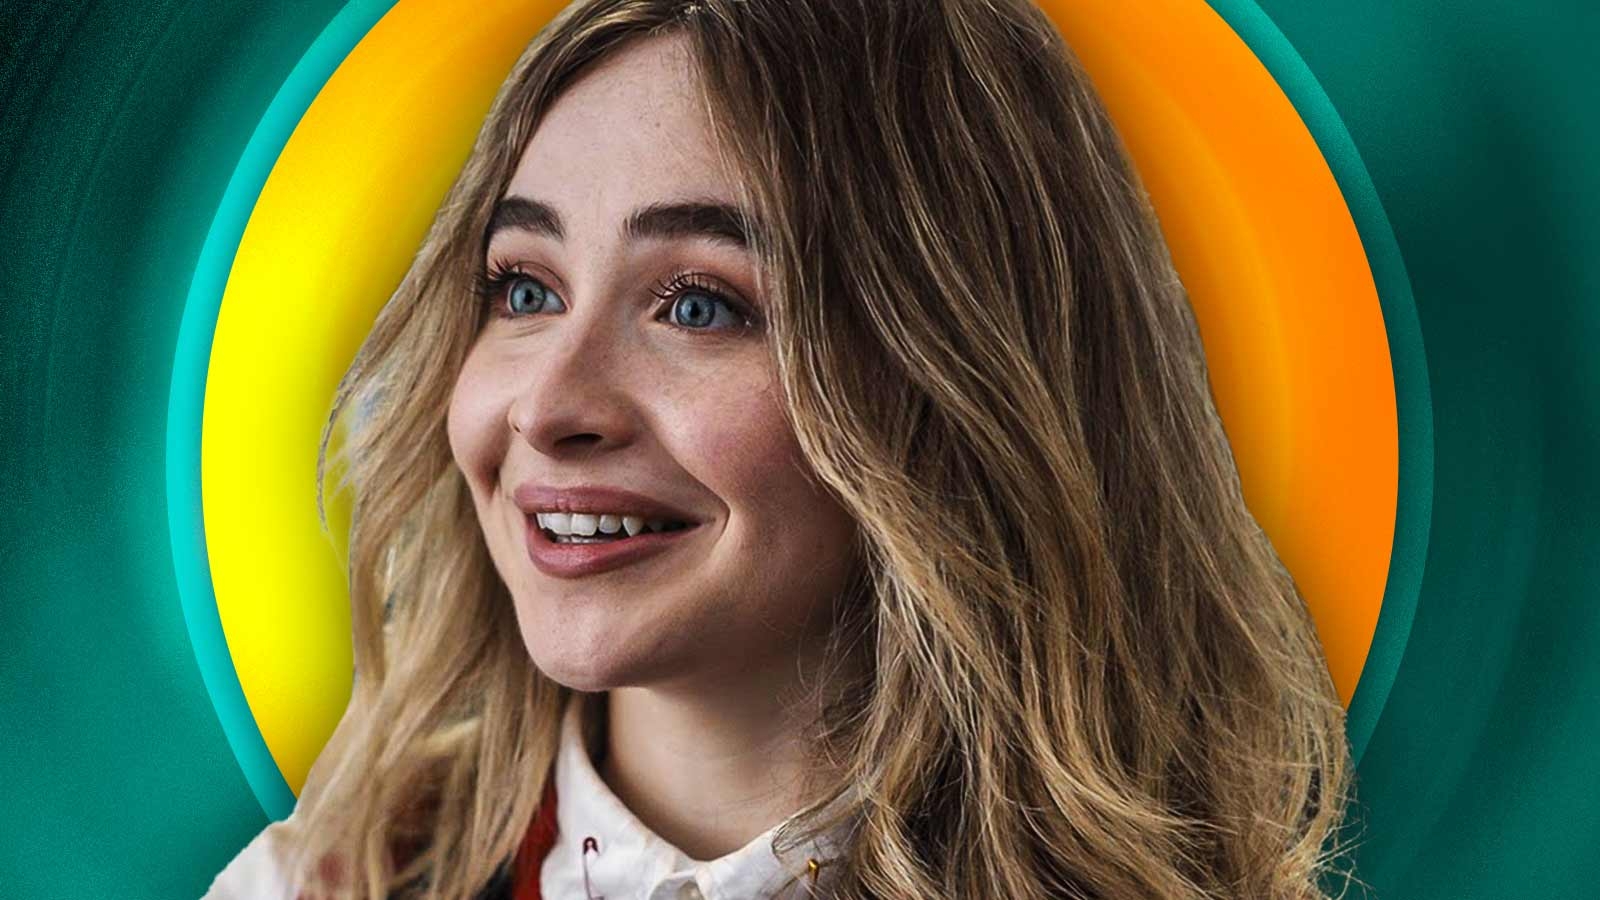 “That’s like my childhood, like, poster girl”: Sabrina Carpenter Cannot Stop Fangirling Over An Iconic Musician Who Shaped Her Childhood